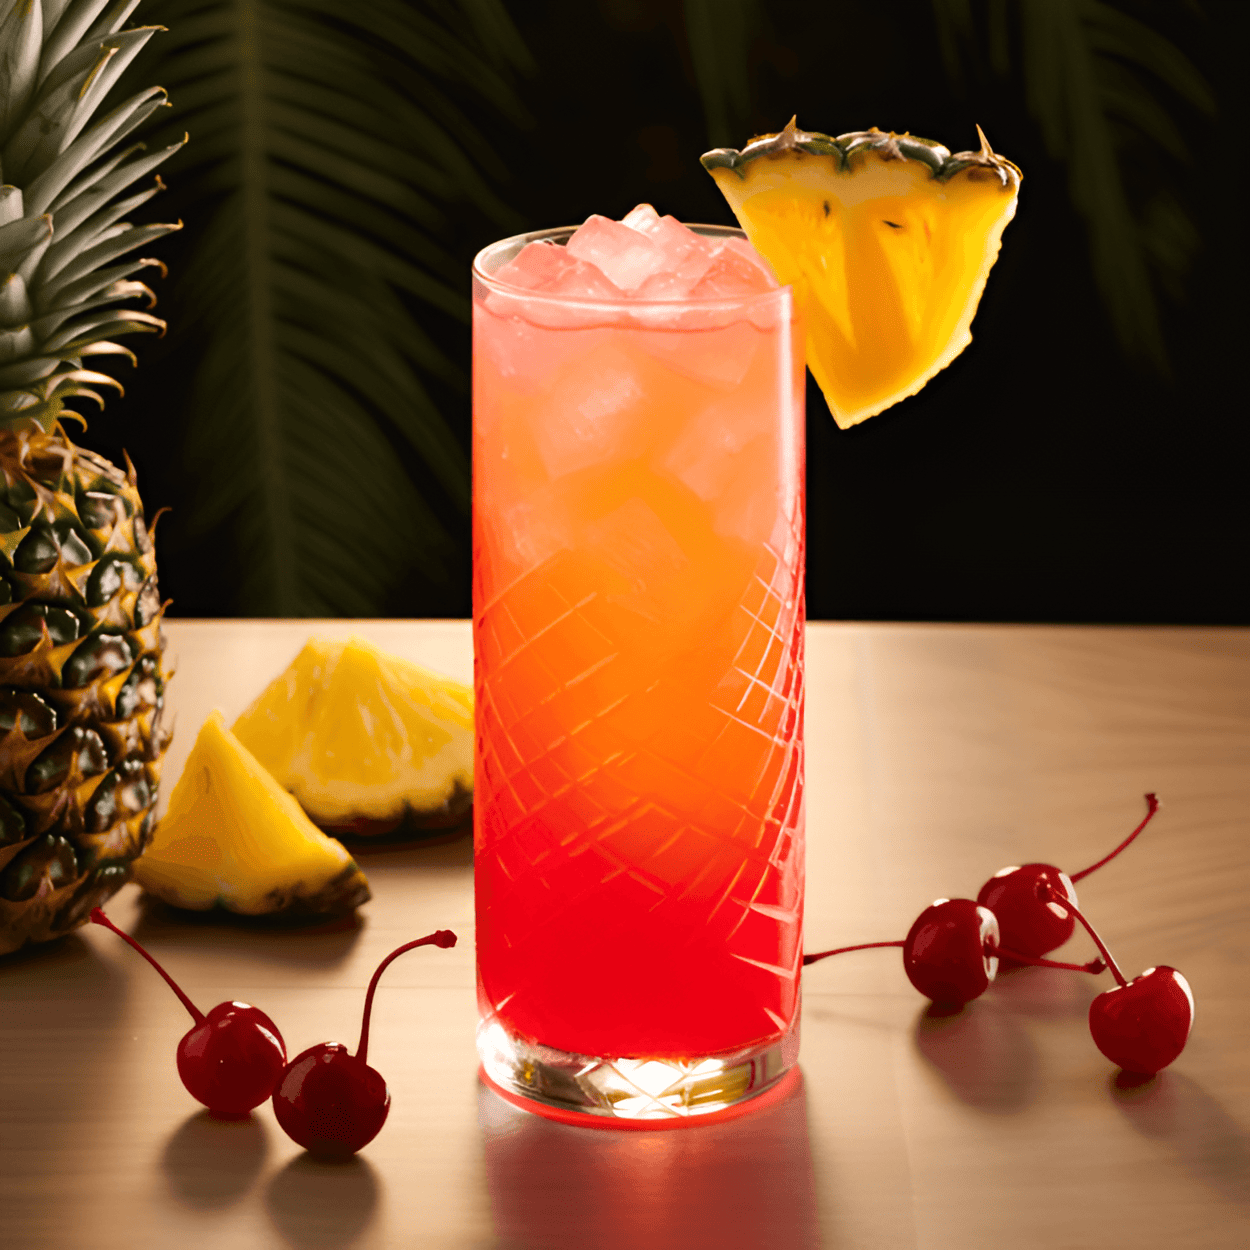 Island Breeze Cocktail Recipe - The Island Breeze is a delightful mix of sweet and tangy flavors. The pineapple juice adds a tropical sweetness, while the cranberry juice brings a tart edge. The vodka provides a subtle kick, making this cocktail a refreshing, well-balanced drink.